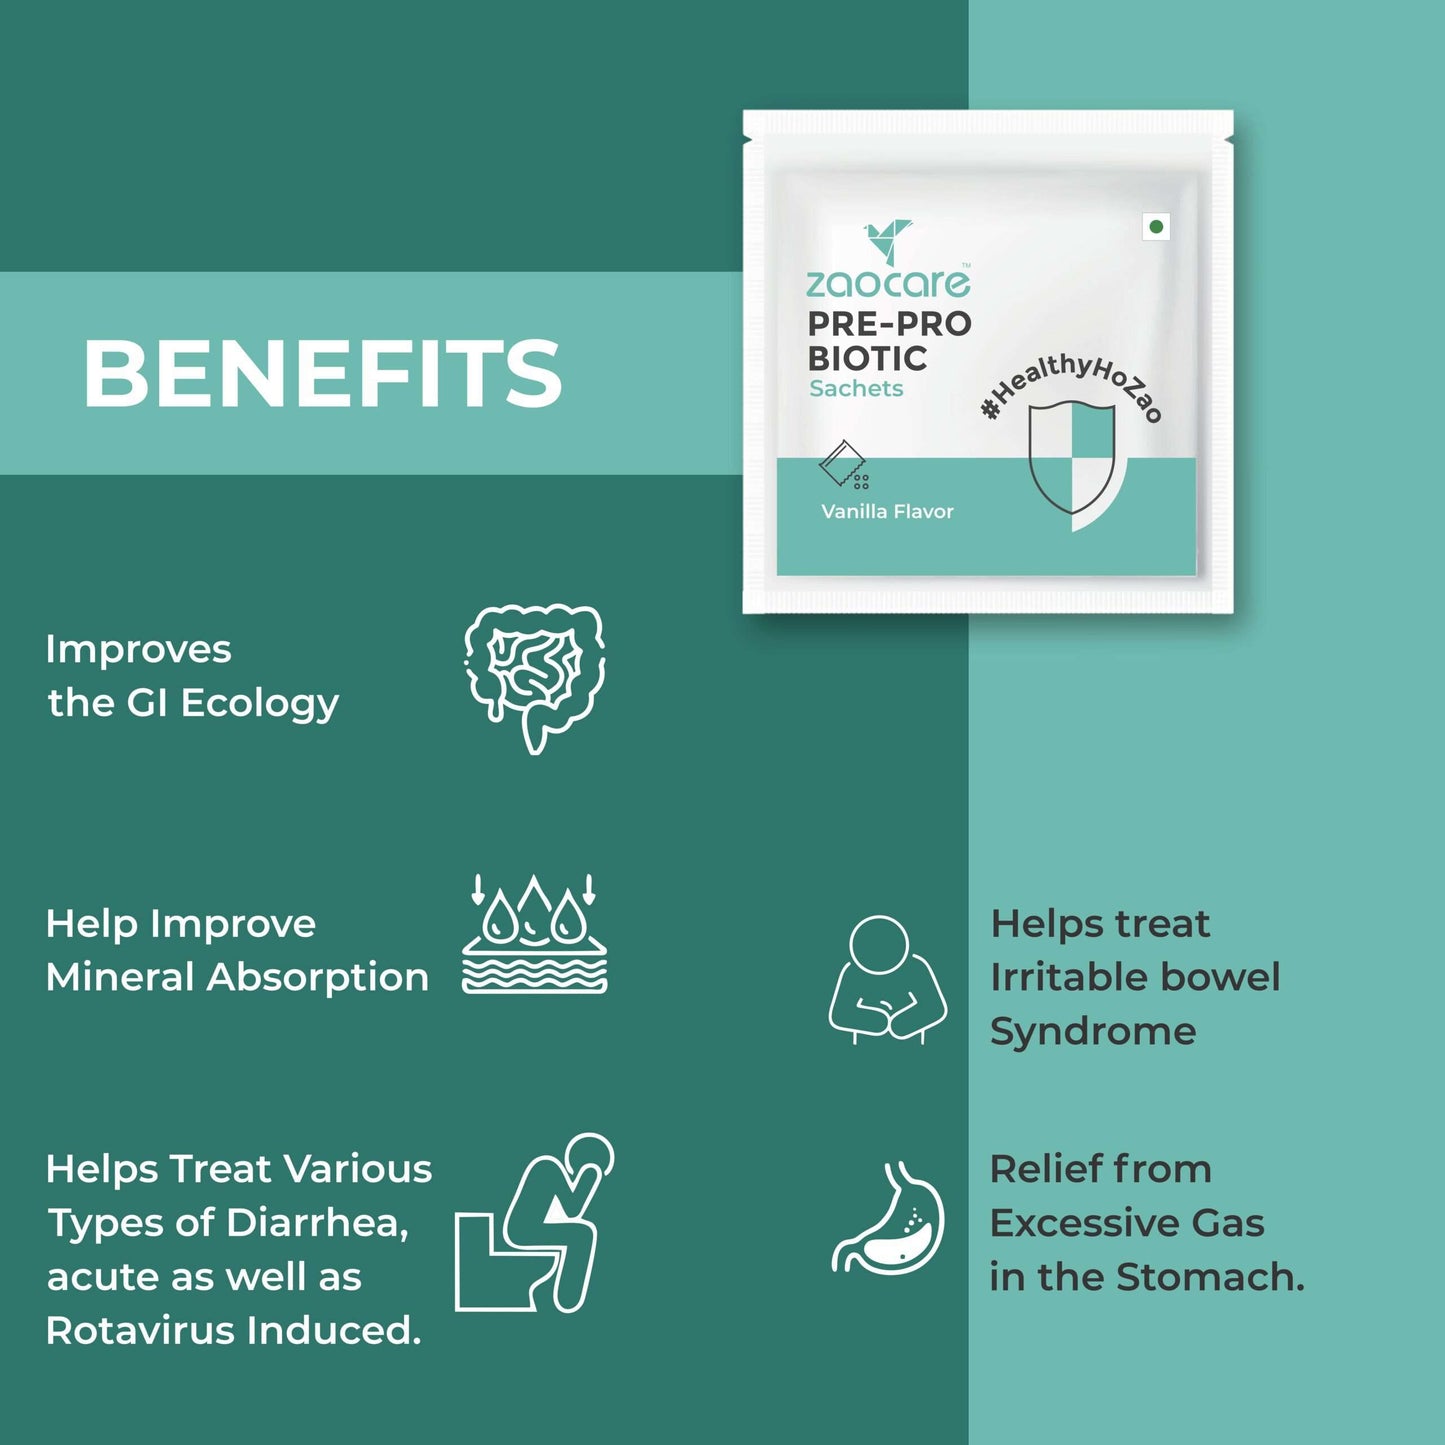 Gut Health solution with Zaocare Pre Probiotic Orosoluble sachets